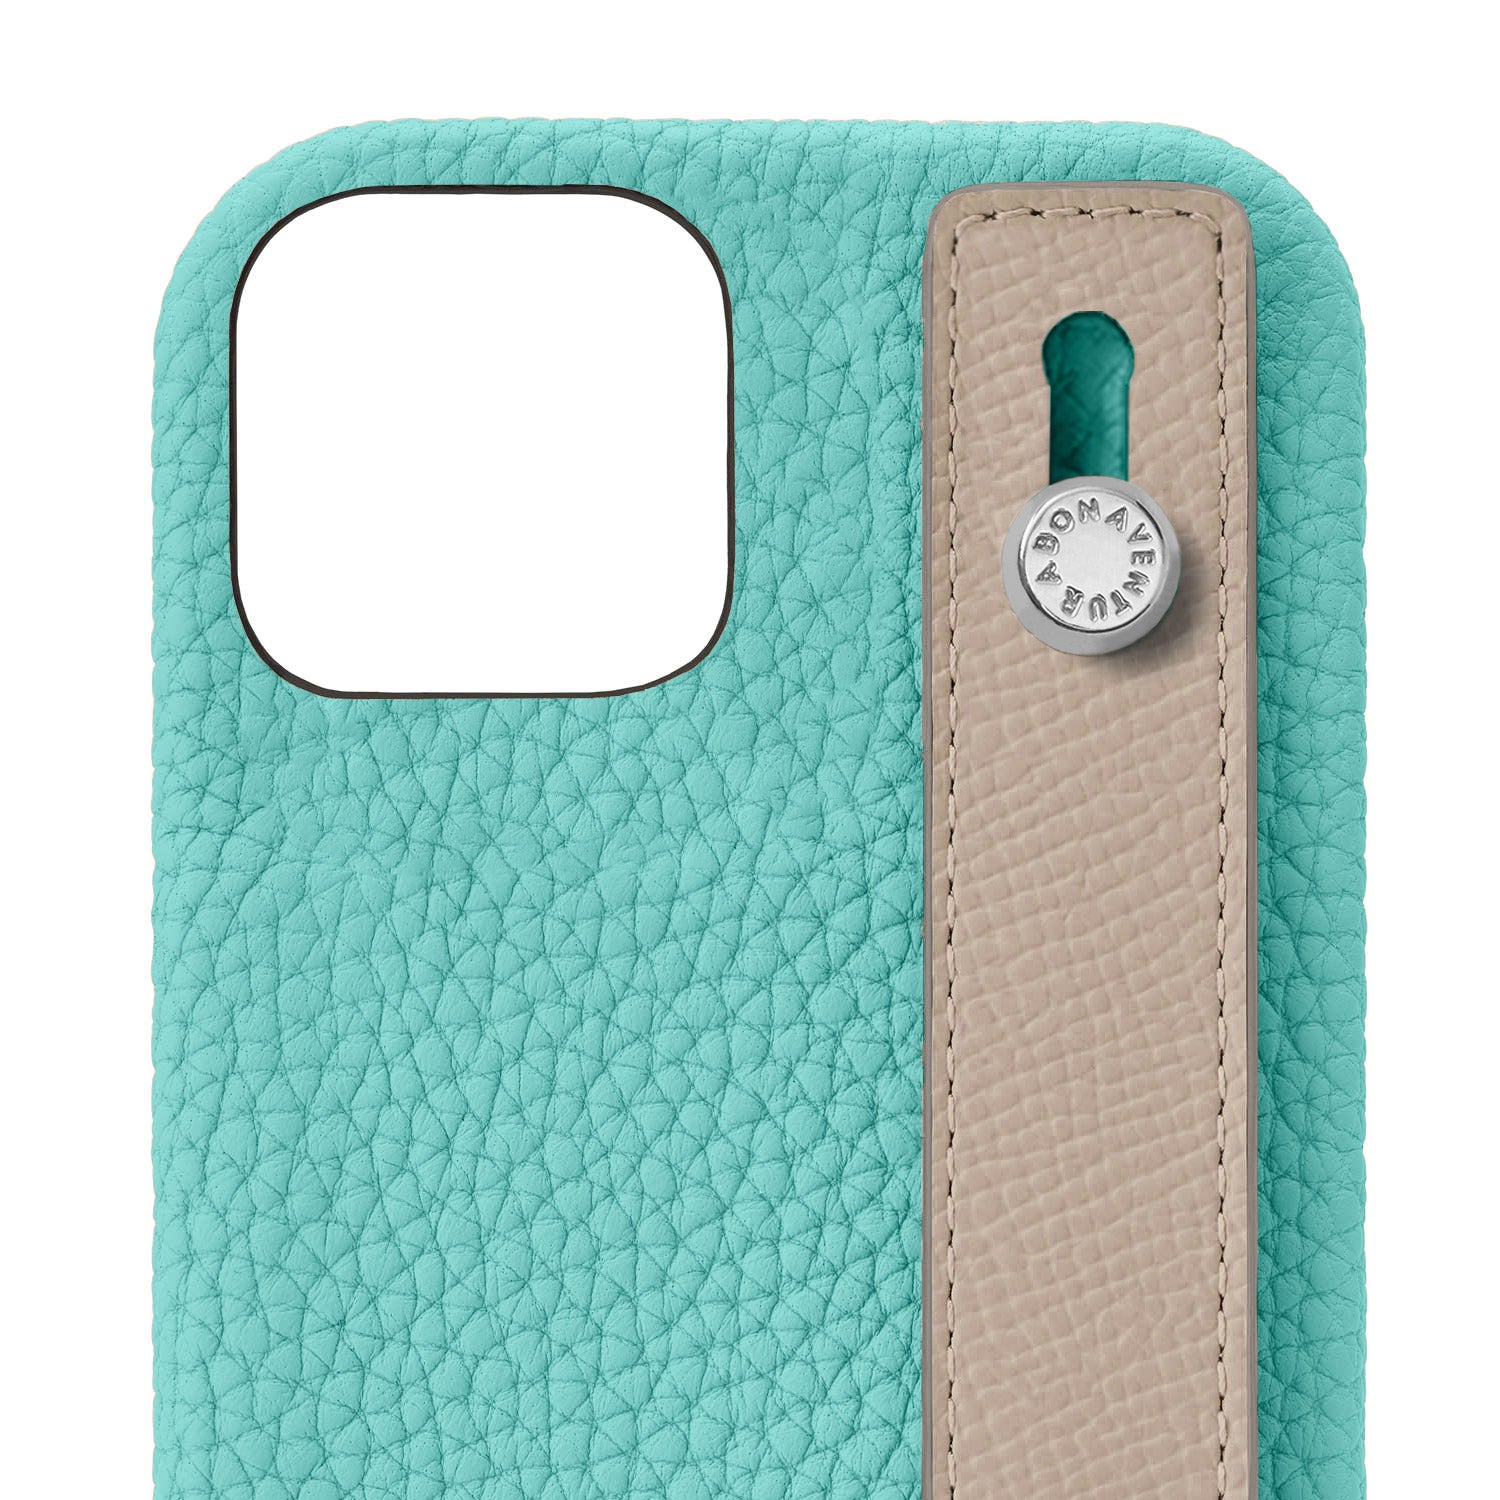 (iPhone 13) Back cover case with handle, shrink leather